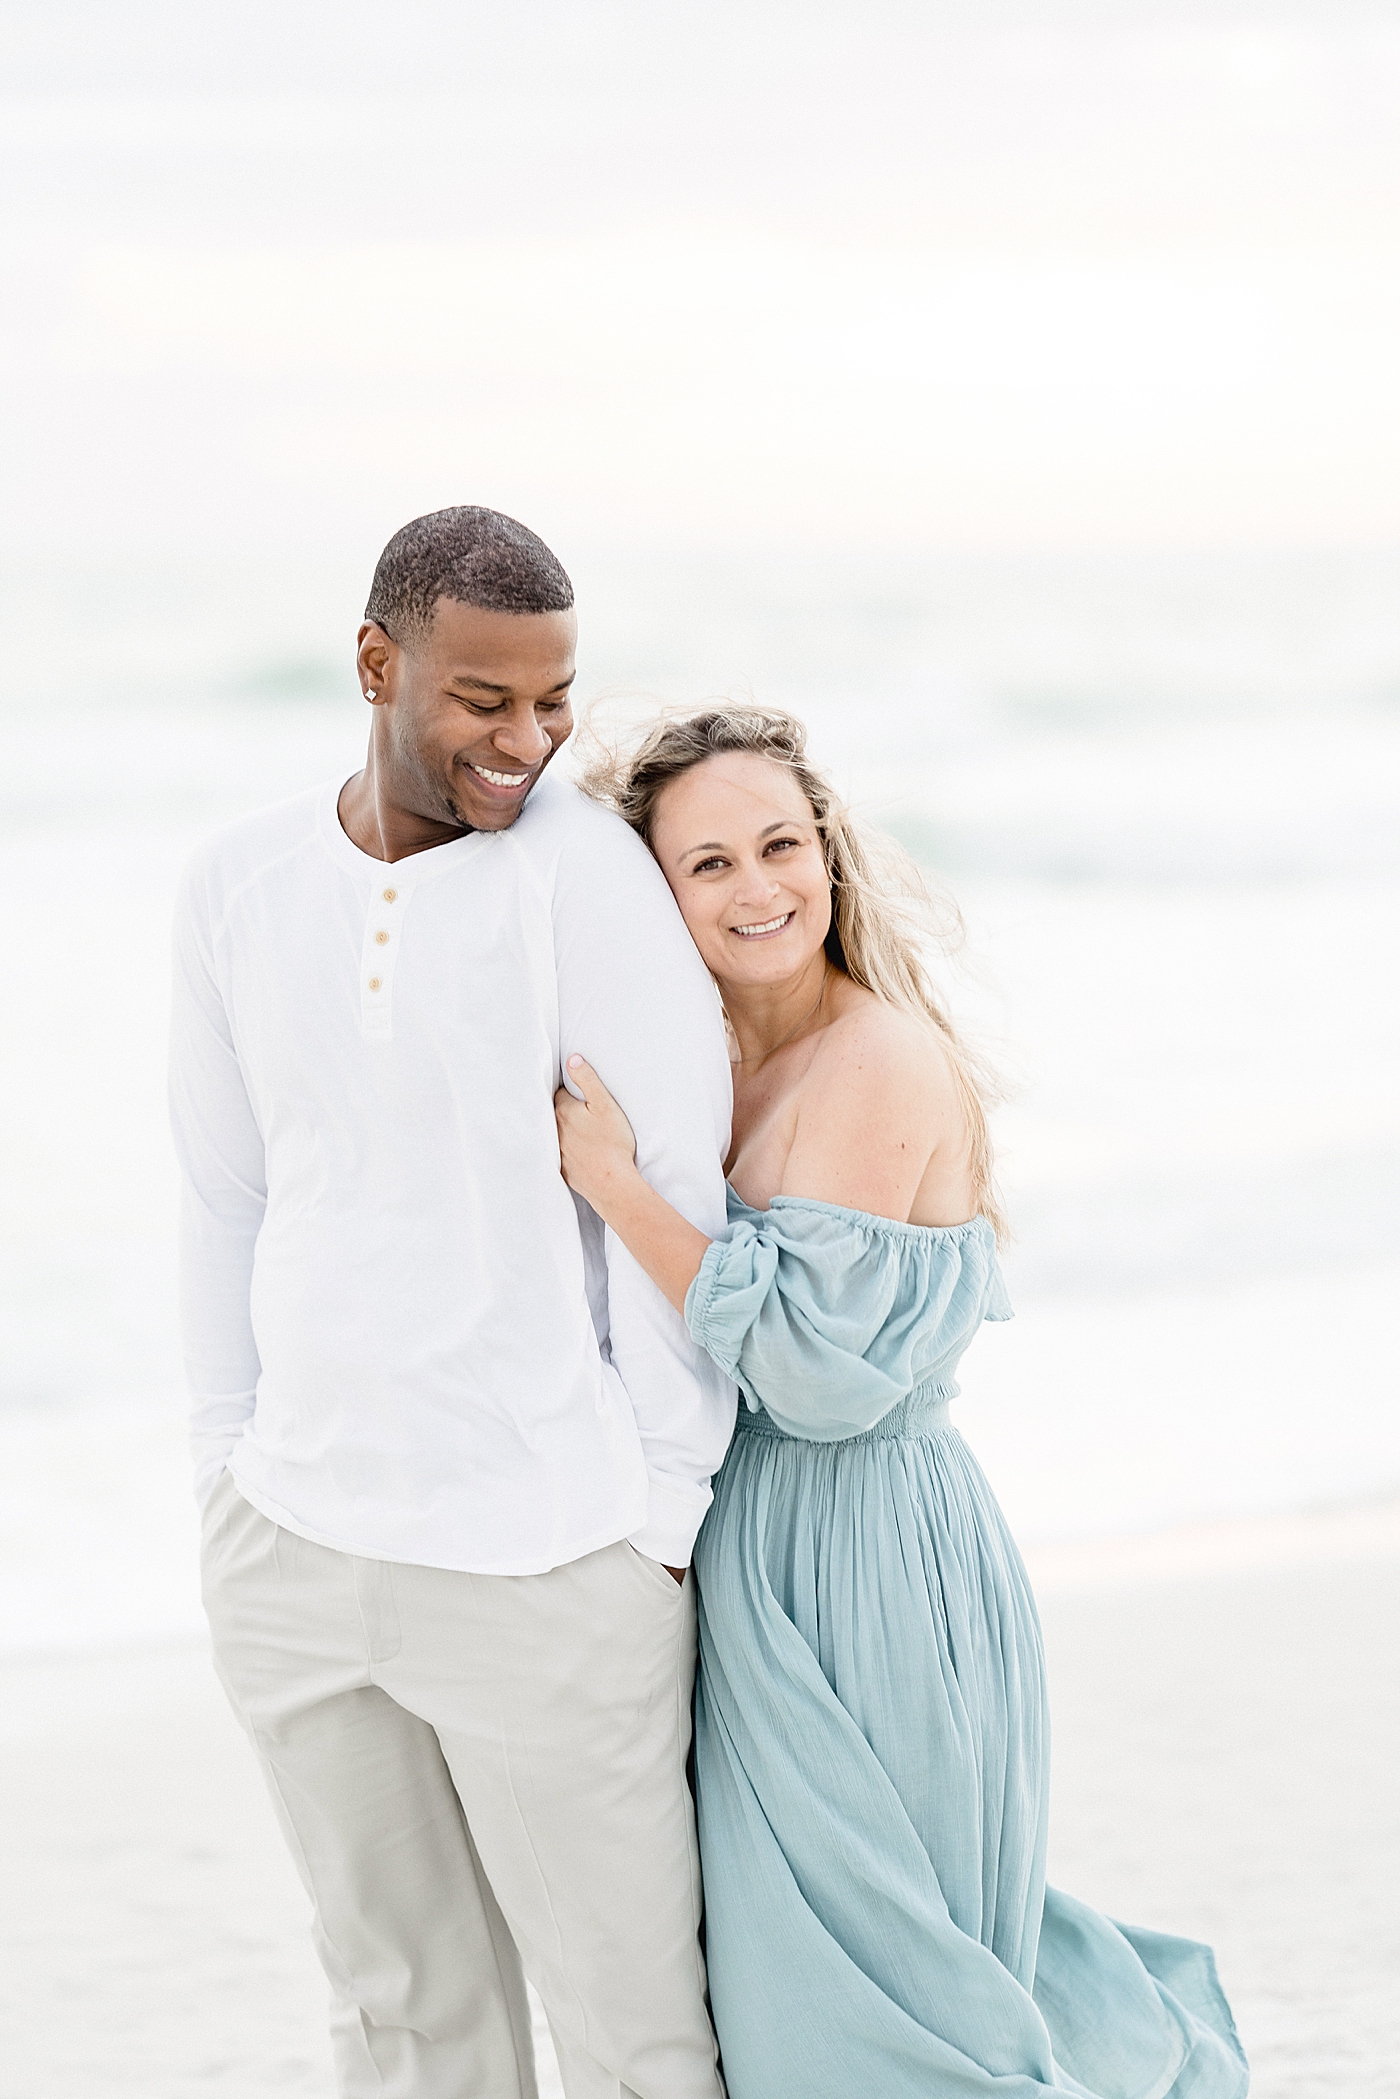 Husband and wife photos on the beach. Photo by Brittany Elise Photography.